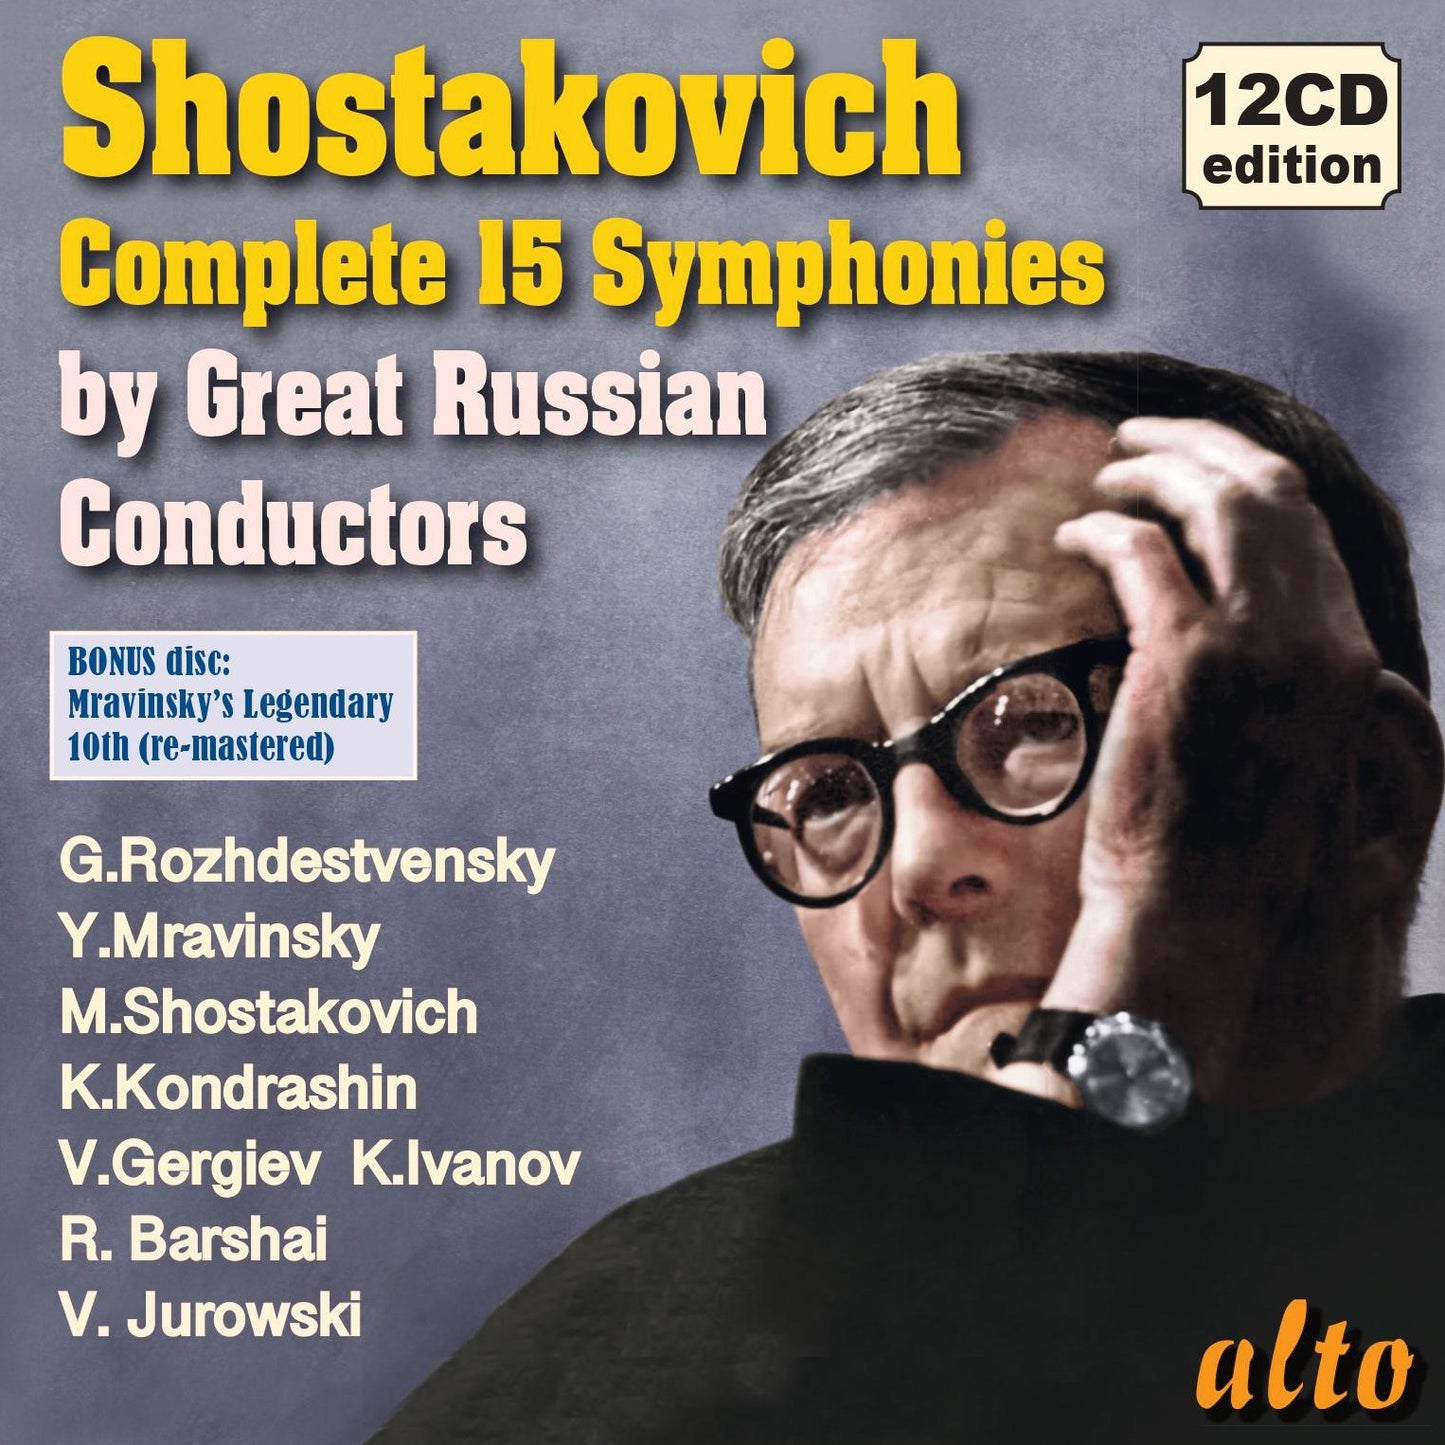 SHOSTAKOVICH: Complete Symphonies by Great Russian Conductors (12 CDS)